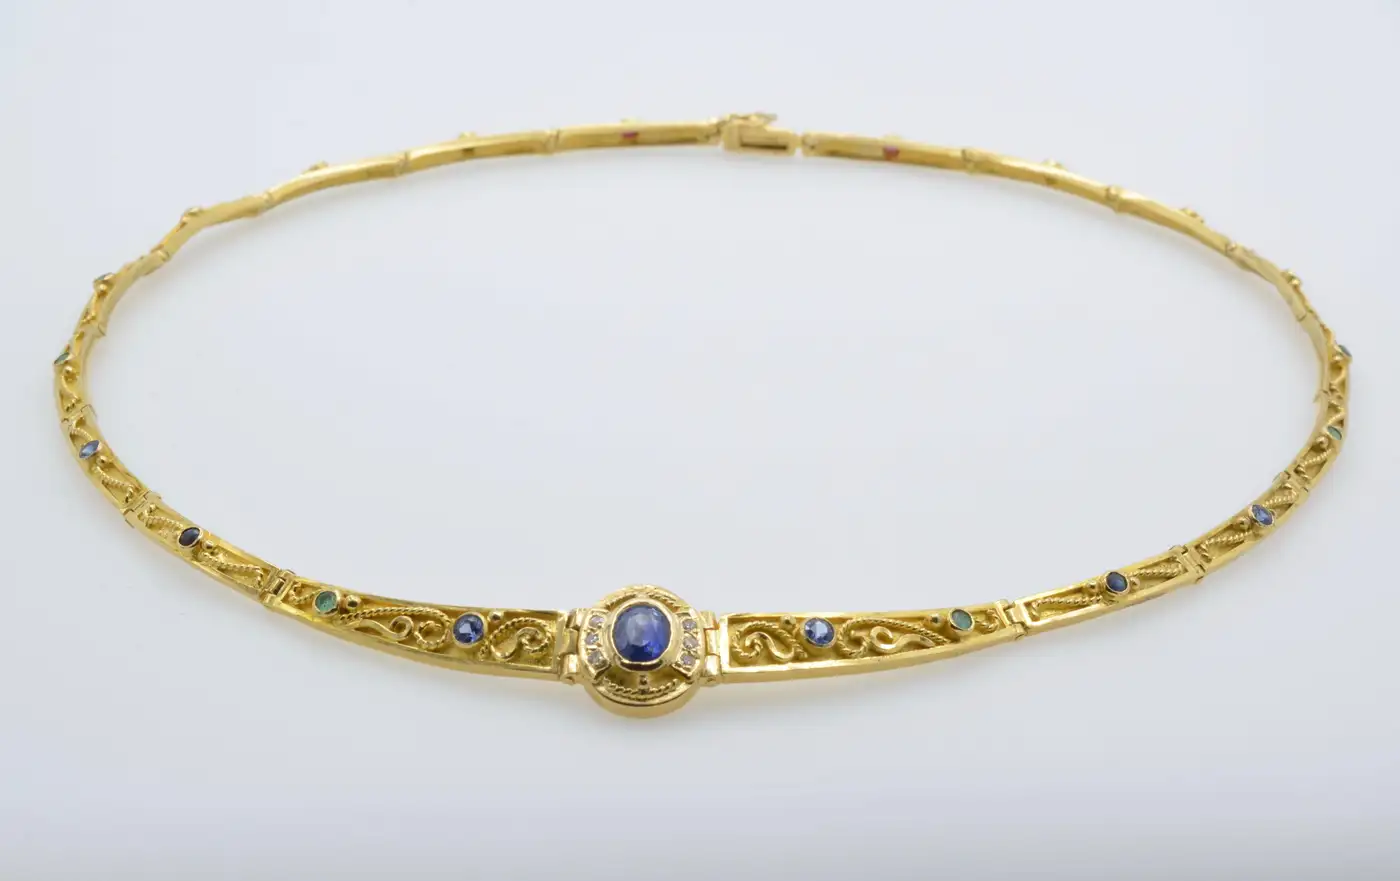 Gold-Greek-Collar-18K-and-Sapphires-Necklace-Articulate-Links-1.webp